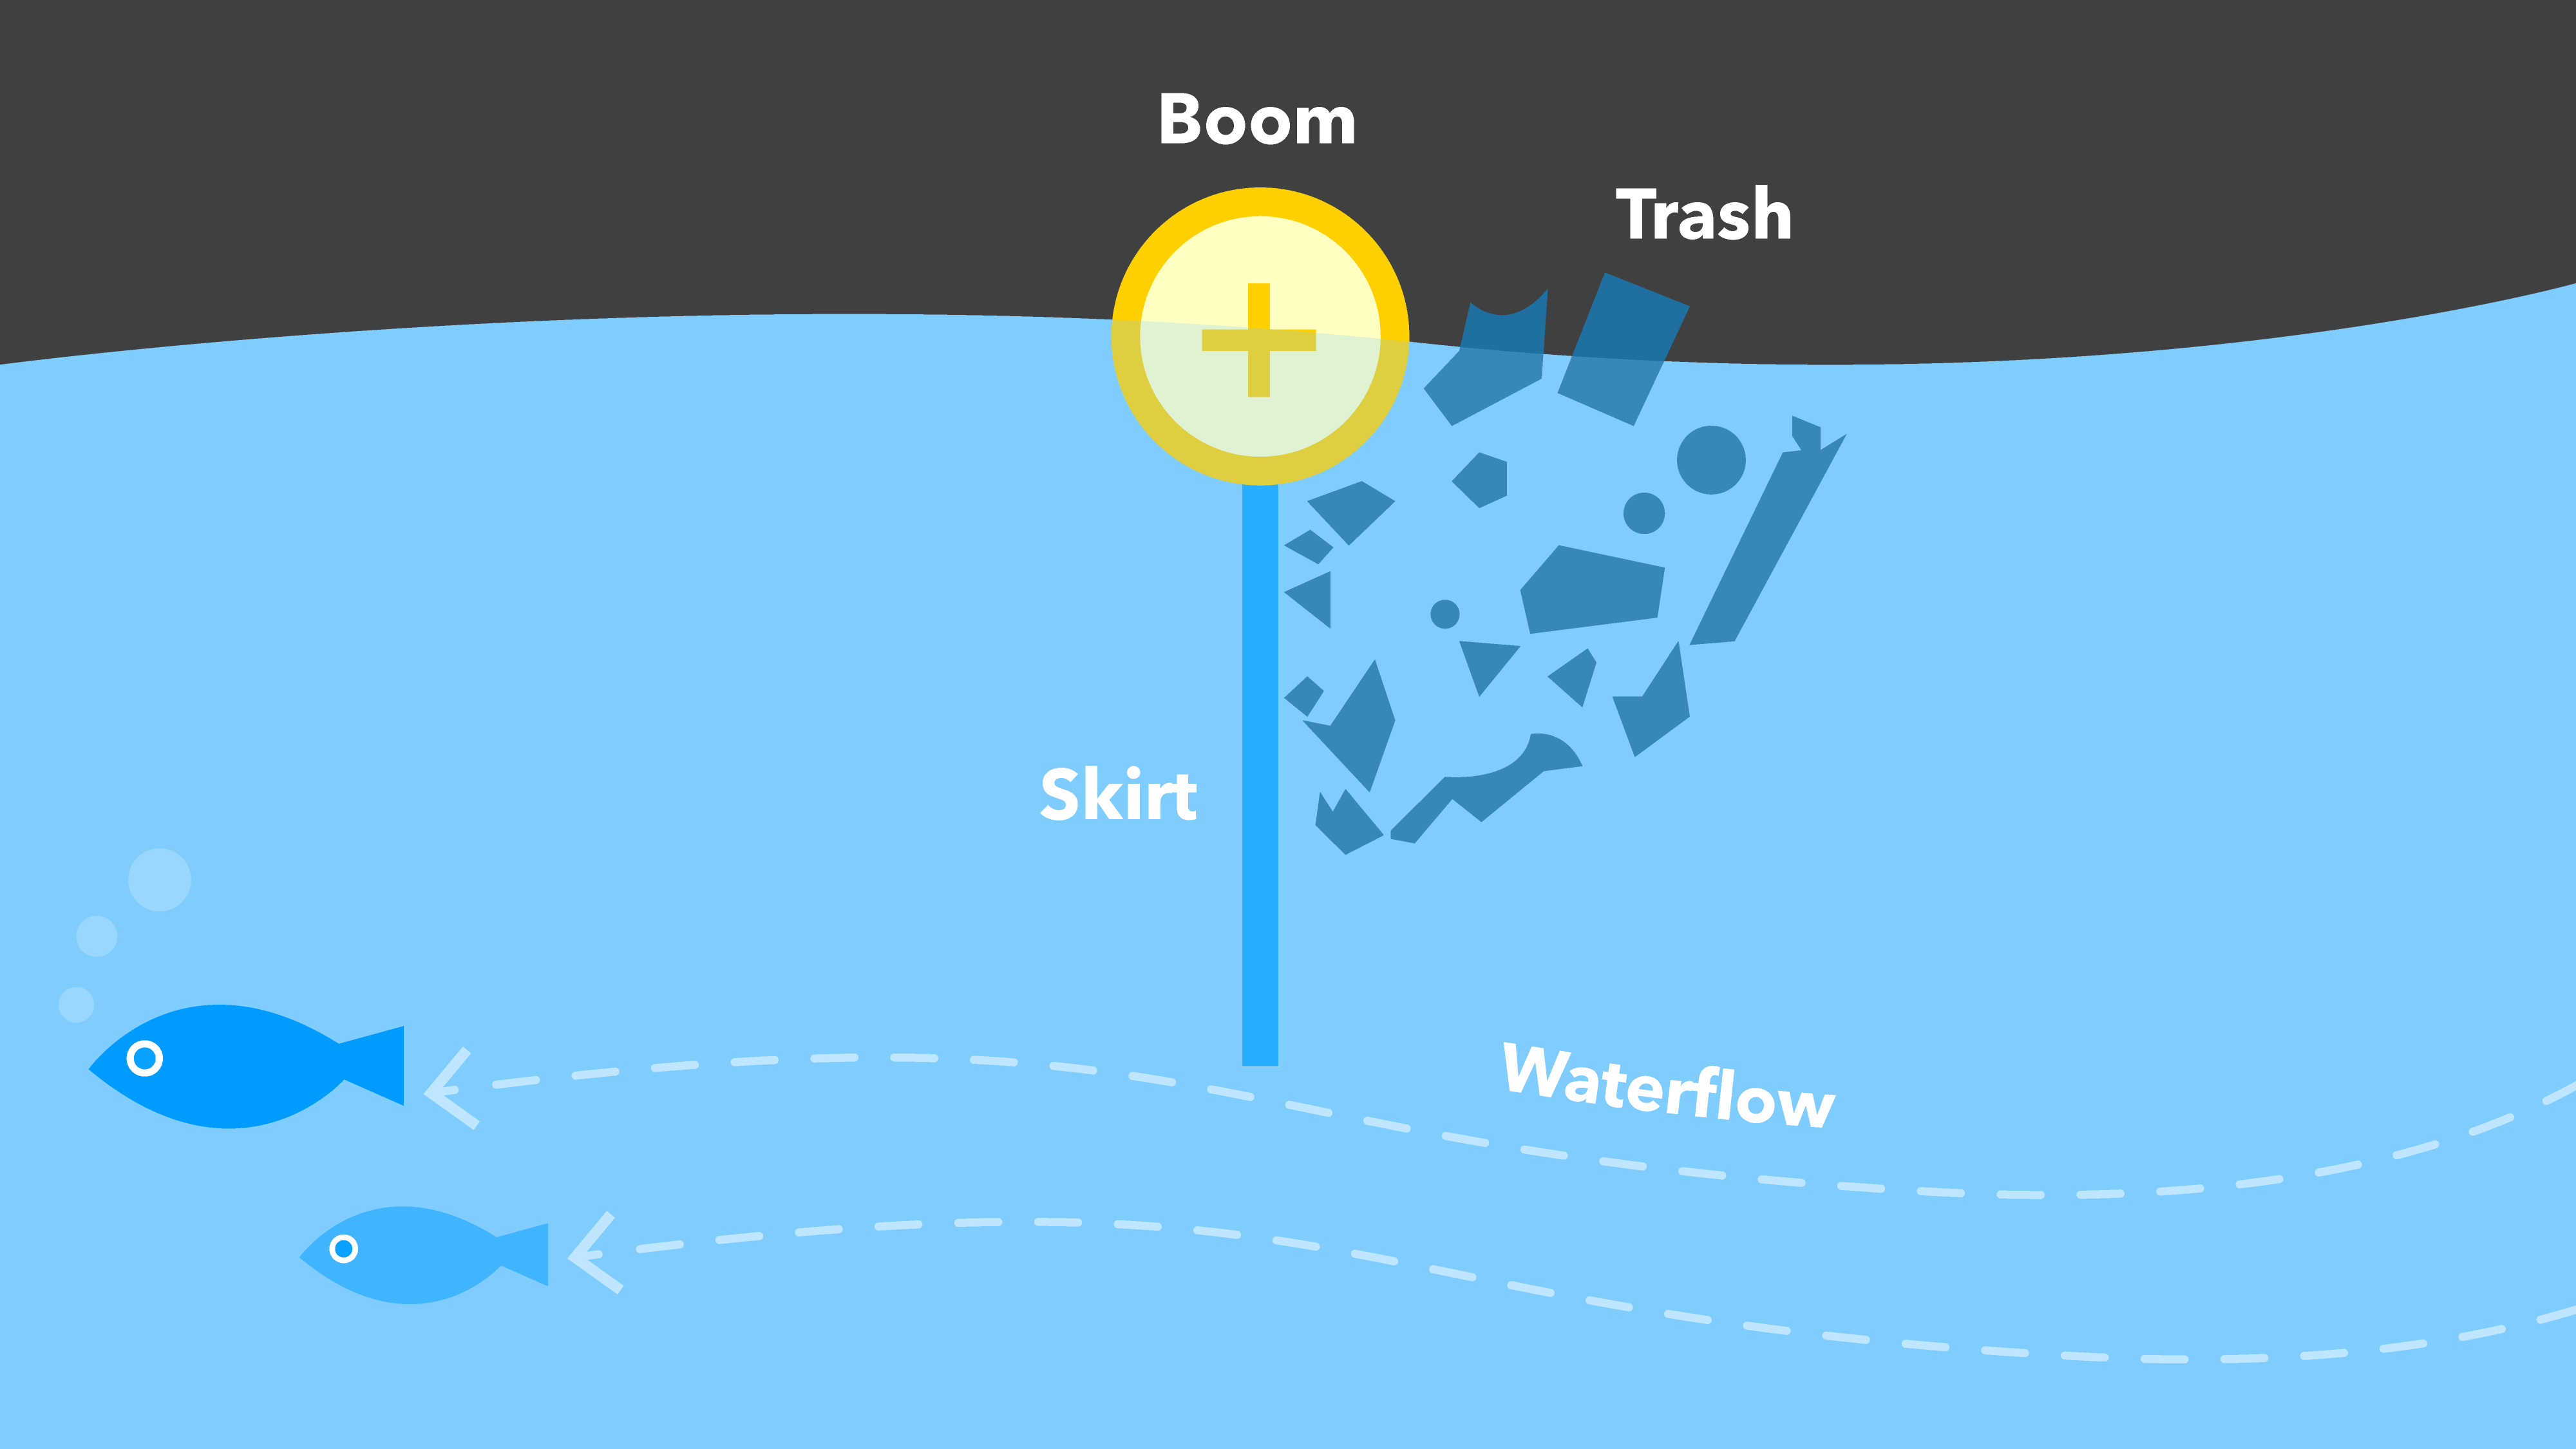 diagram showing how boom floats on surface stopping debris while allowing aquatic life to pass underneath